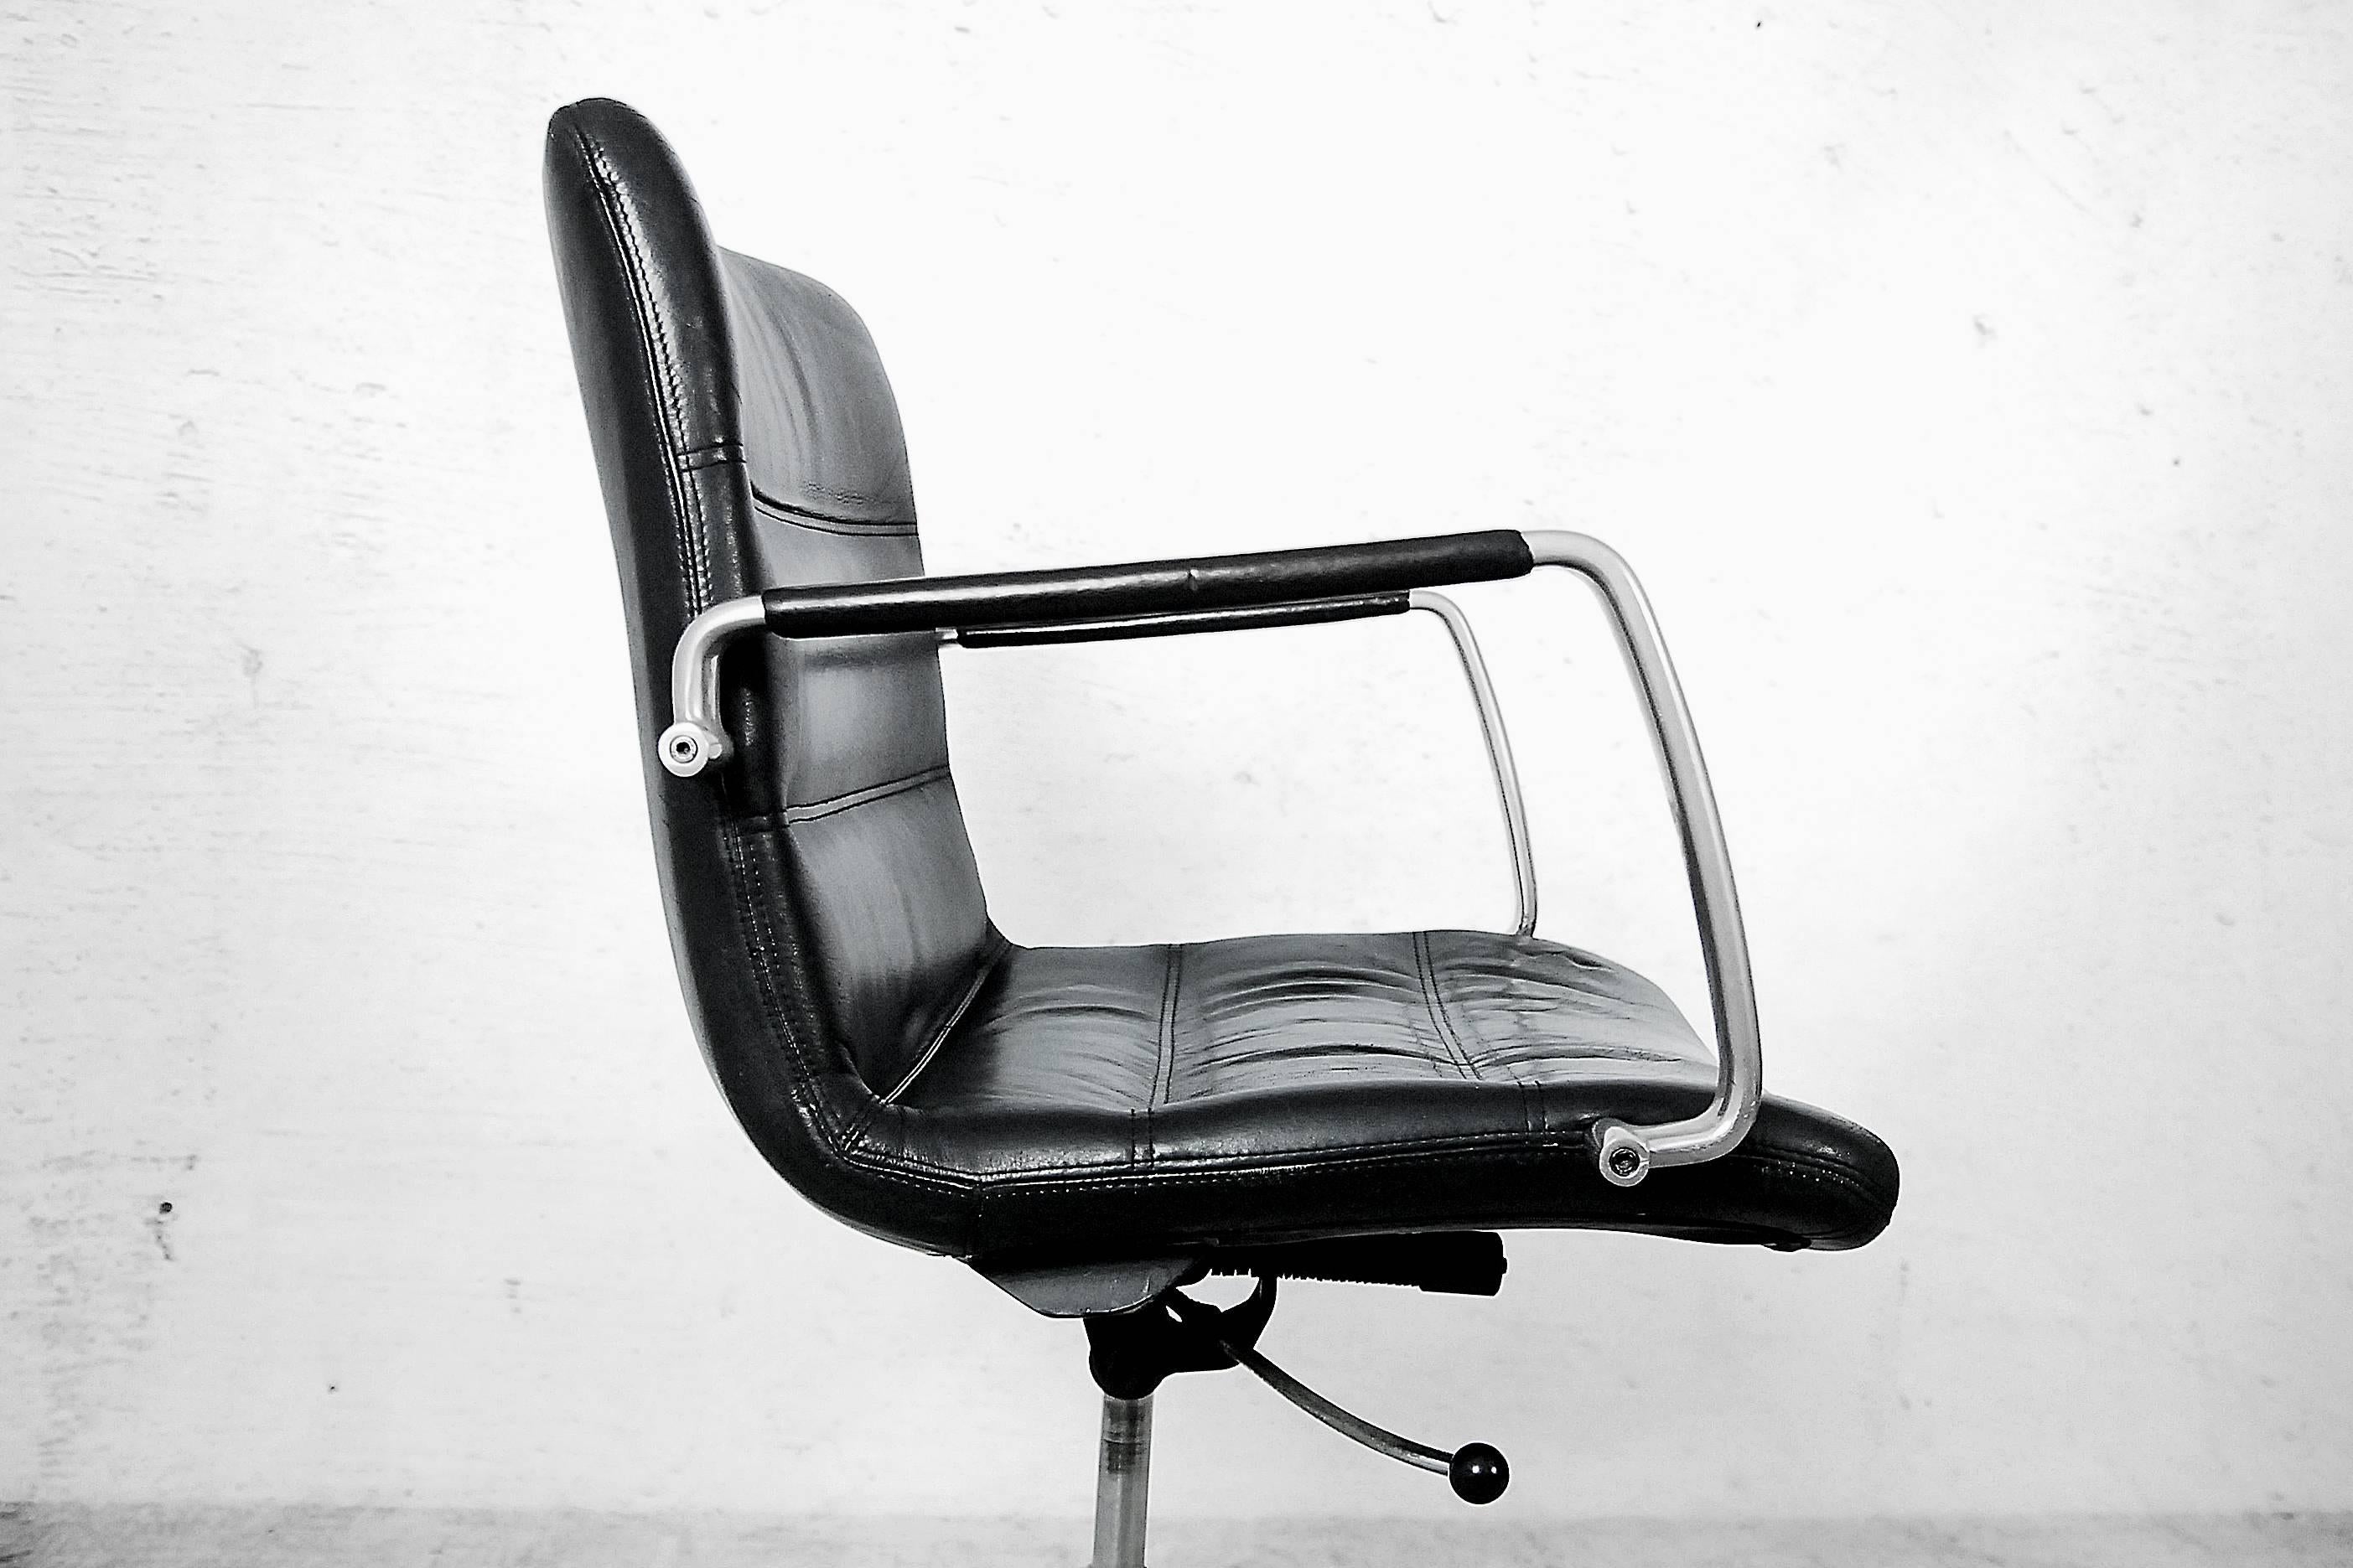 This modern office swivel chair from the 8000 series was designed by Danish designer and professor Jørgen Kastholm for Kusch & Co in Germany in 1972. Kastholm exhibited his creations at many European and American exhibitions to establish himself as